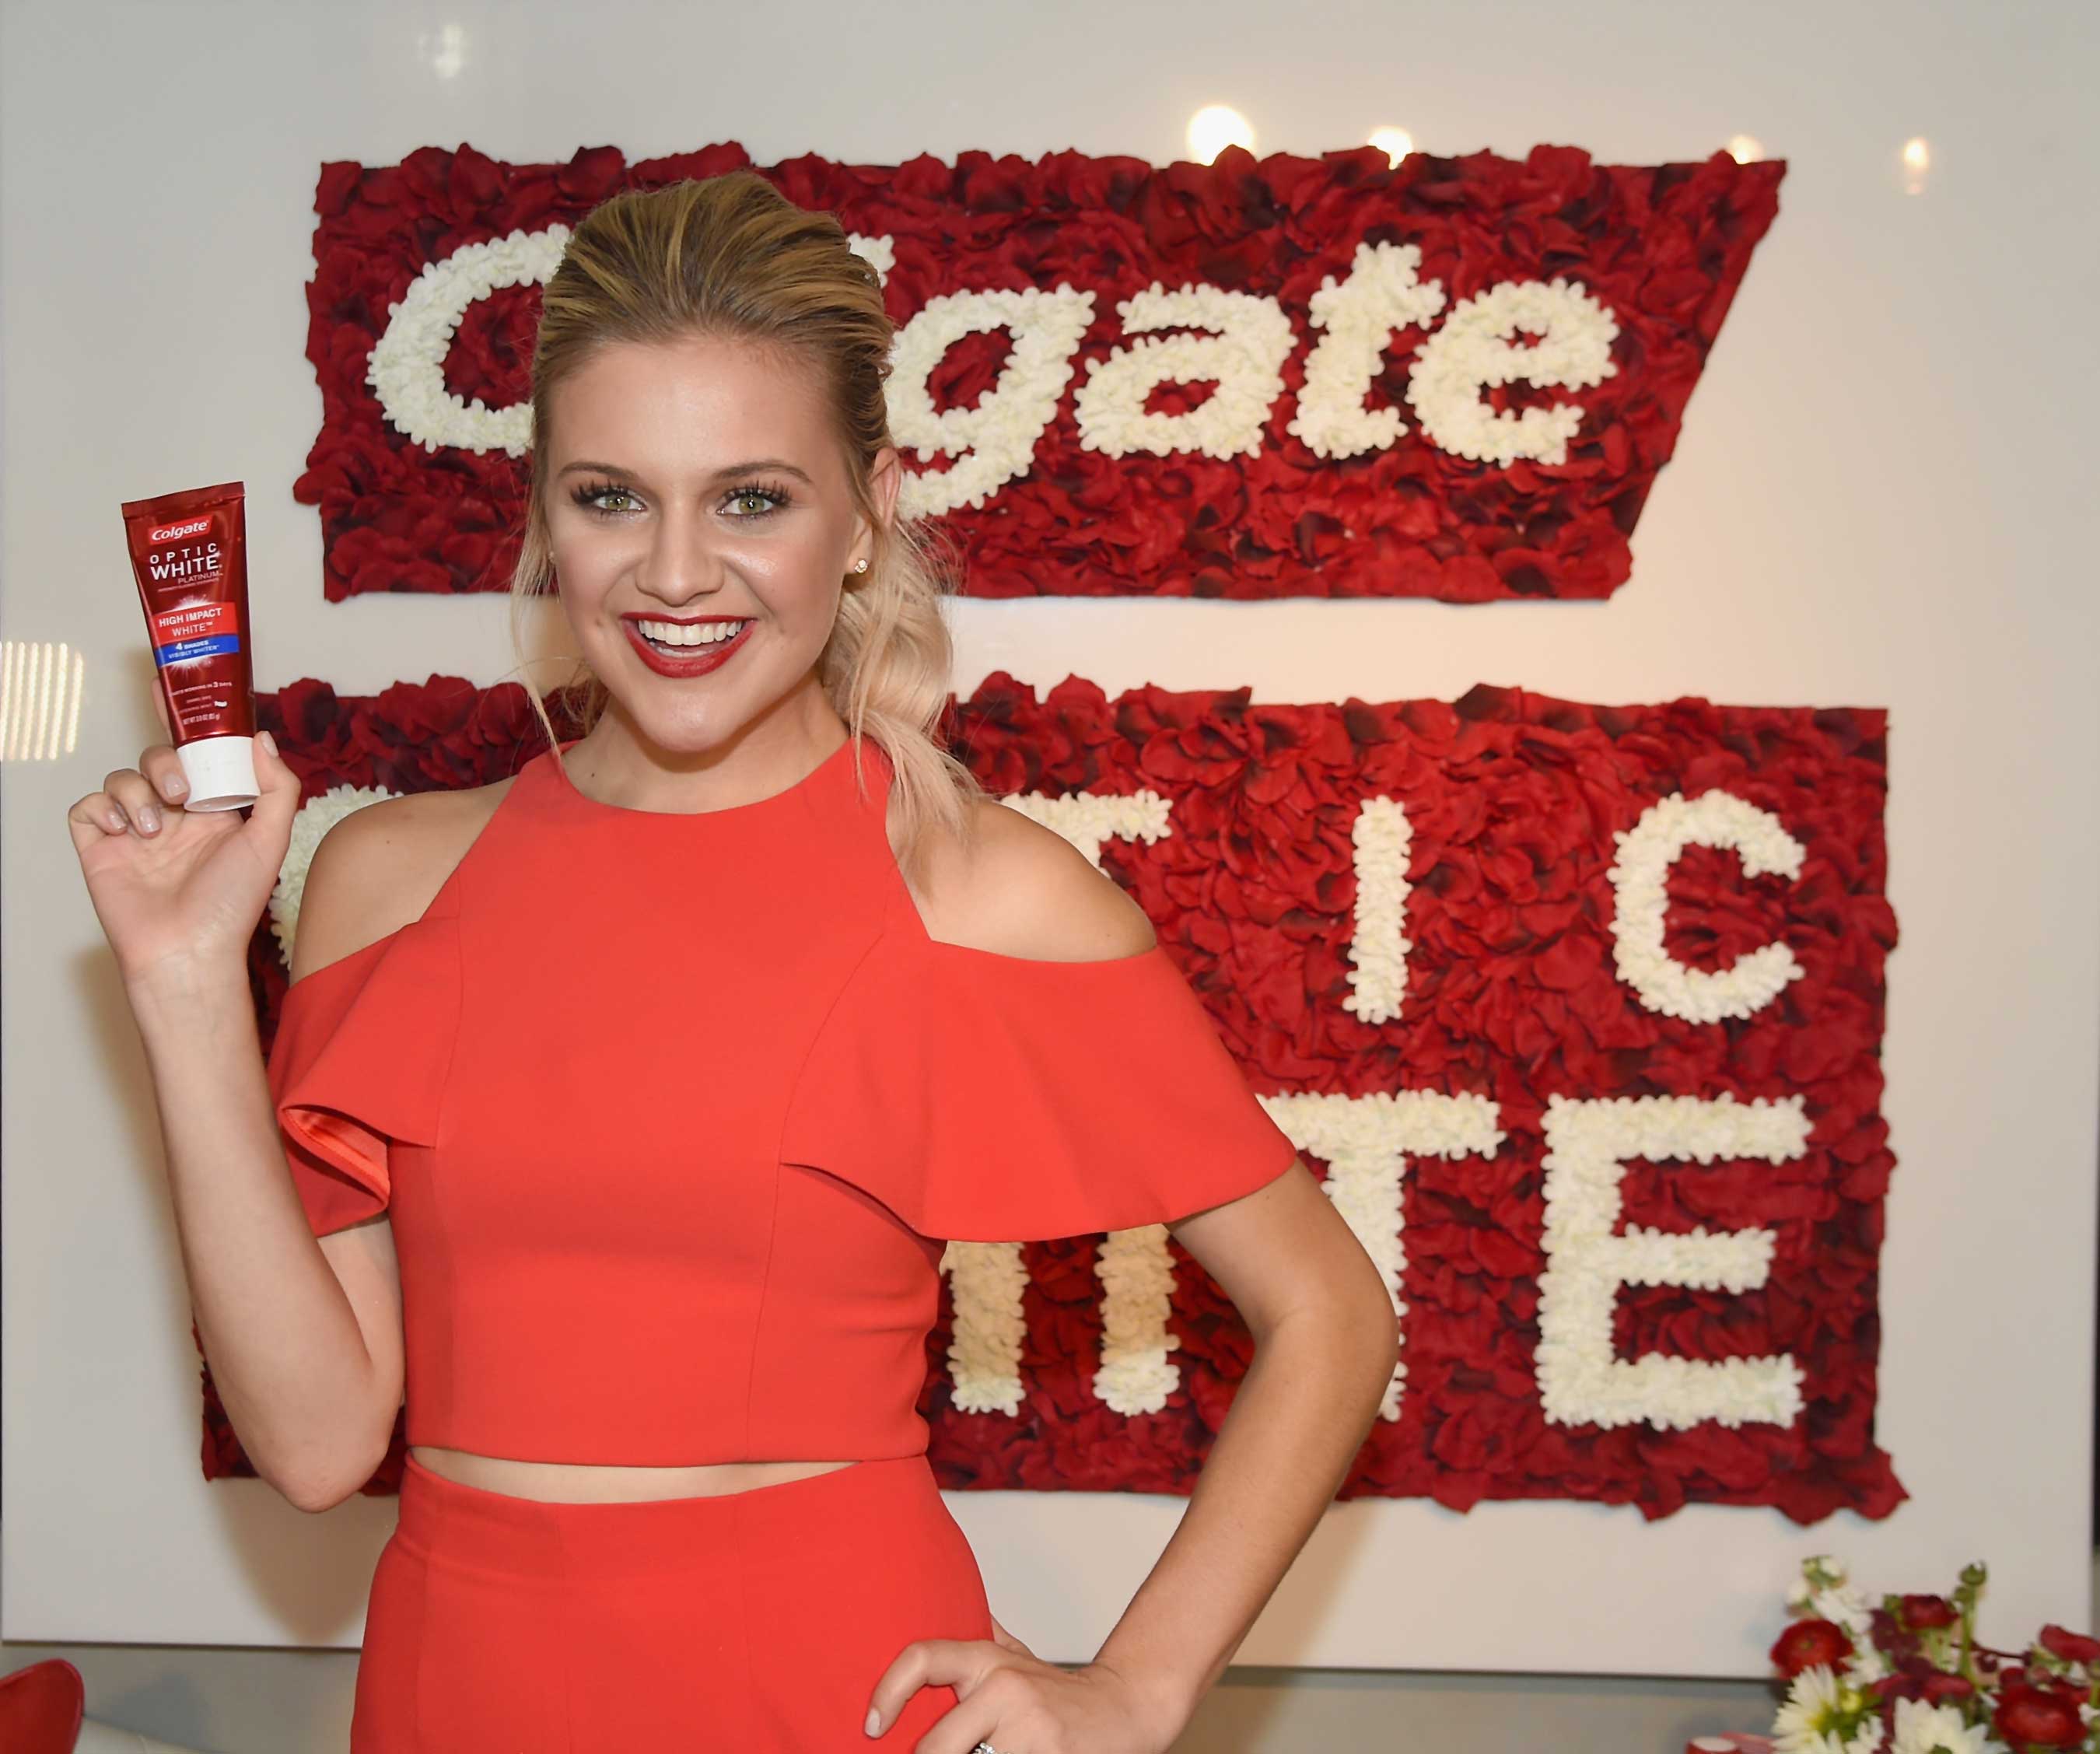 Colgate® Optic White® has teamed up with CMA Female Vocalist of the Year nominee Kelsea Ballerini to celebrate “The 51st Annual CMA Awards.”